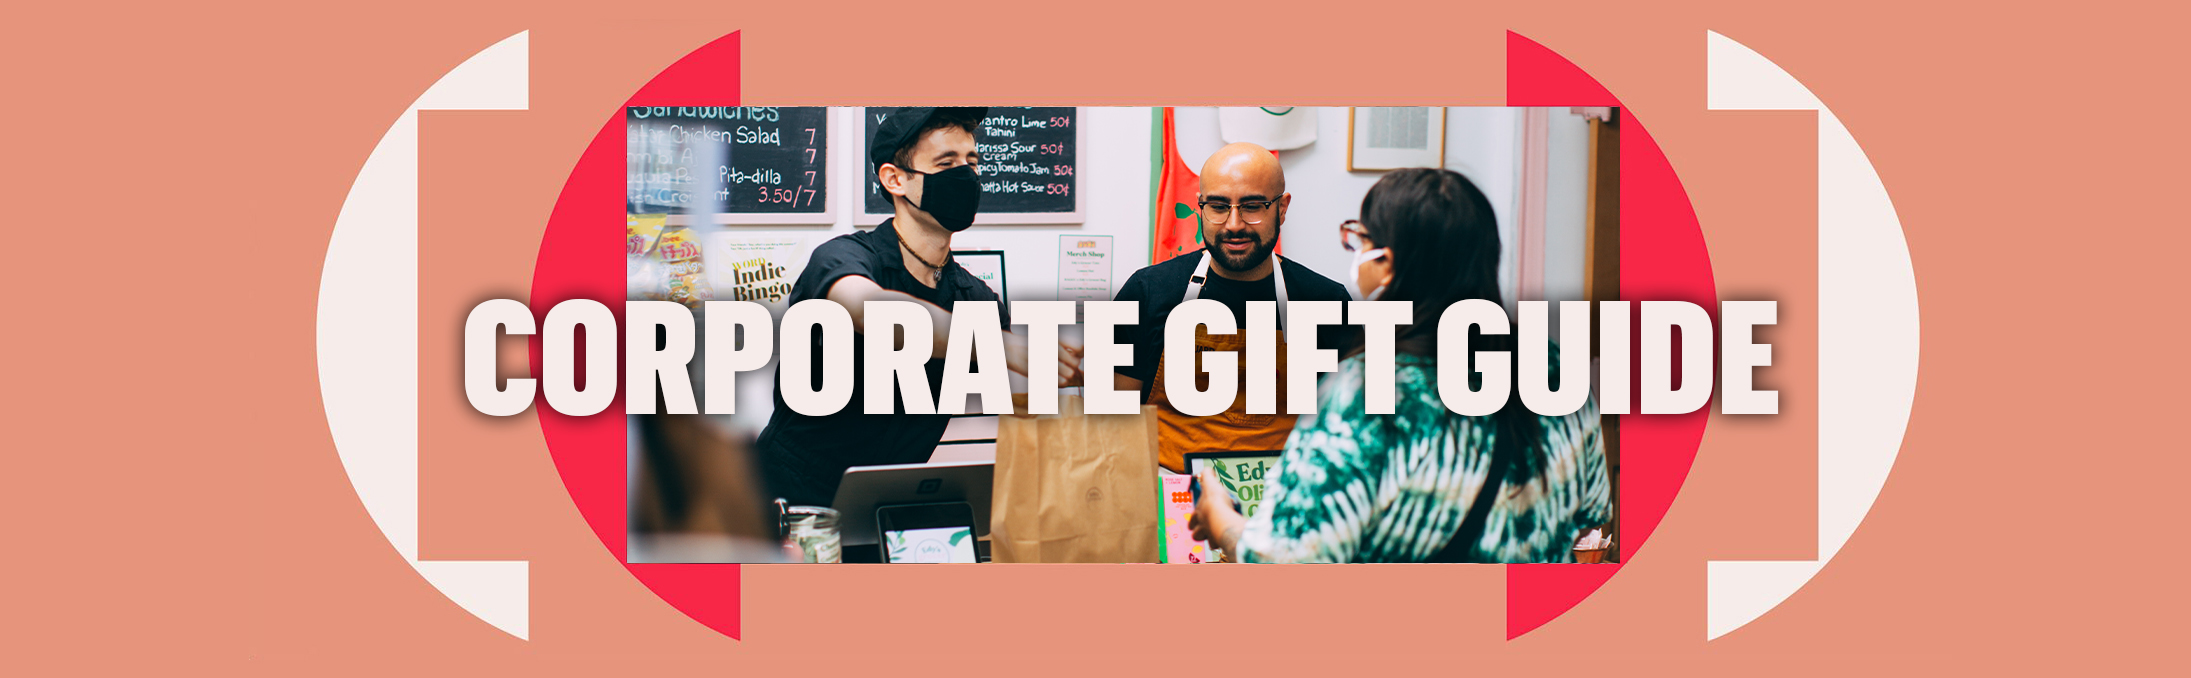 Corporate Gift Guide header